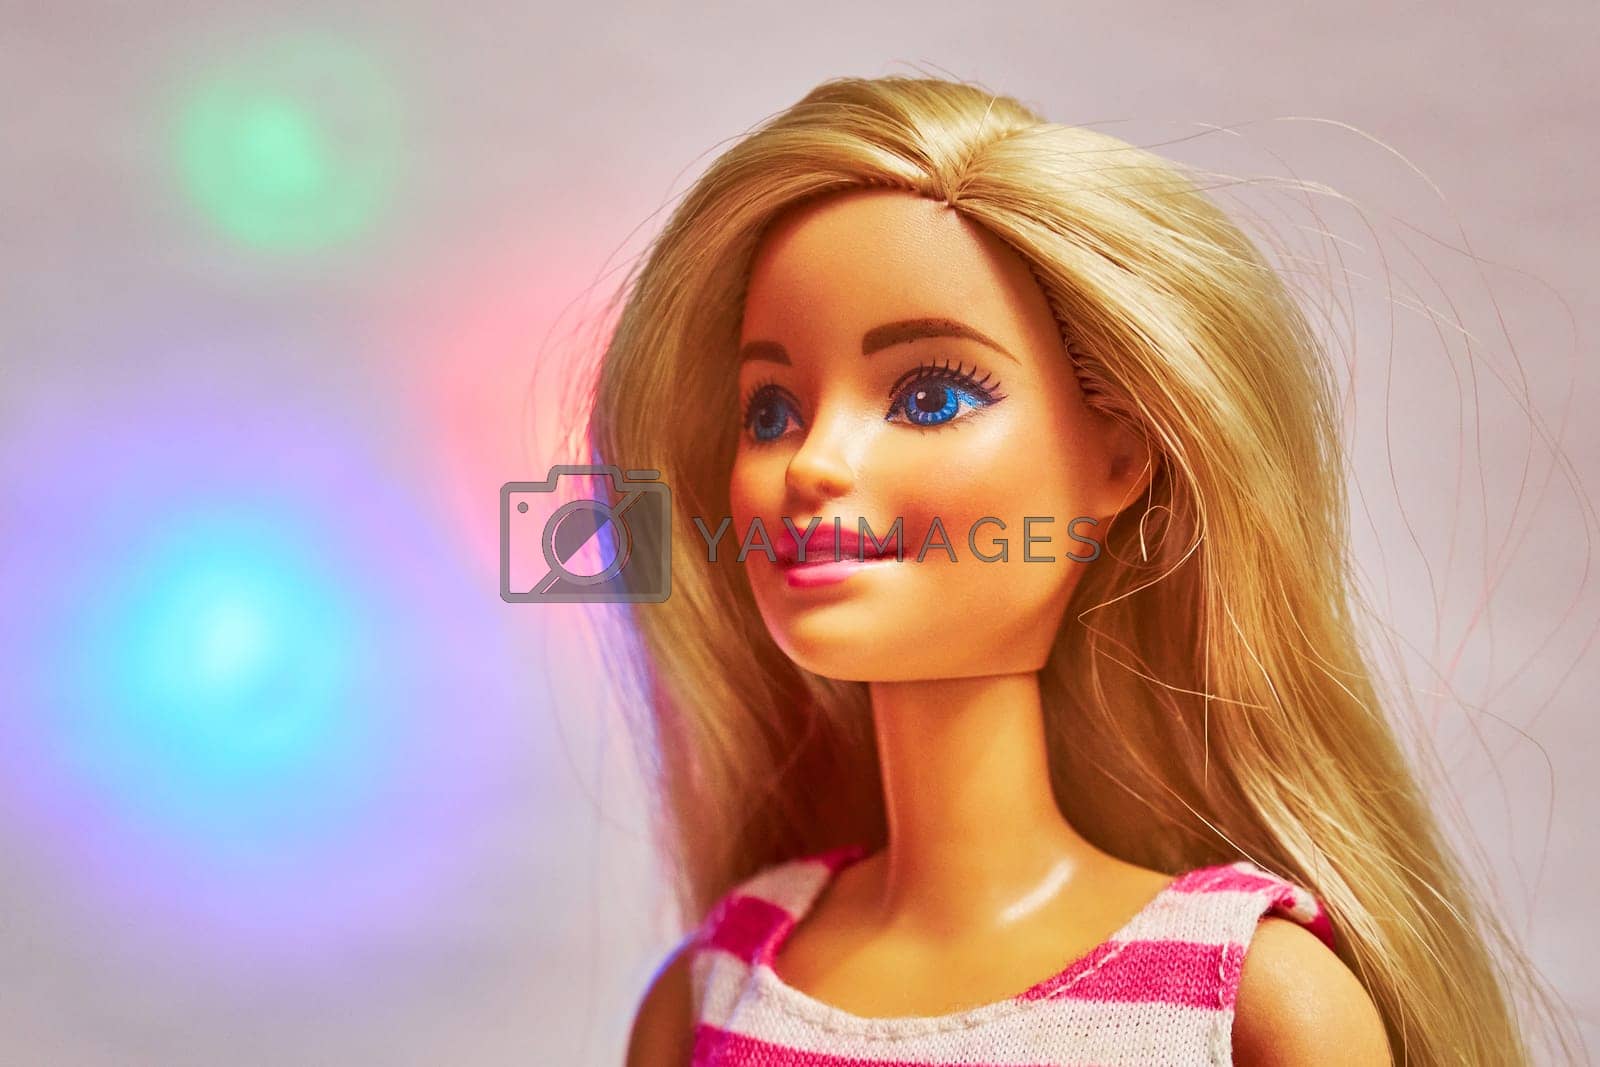 Royalty free image of Barbie doll head close-up by DAndreev